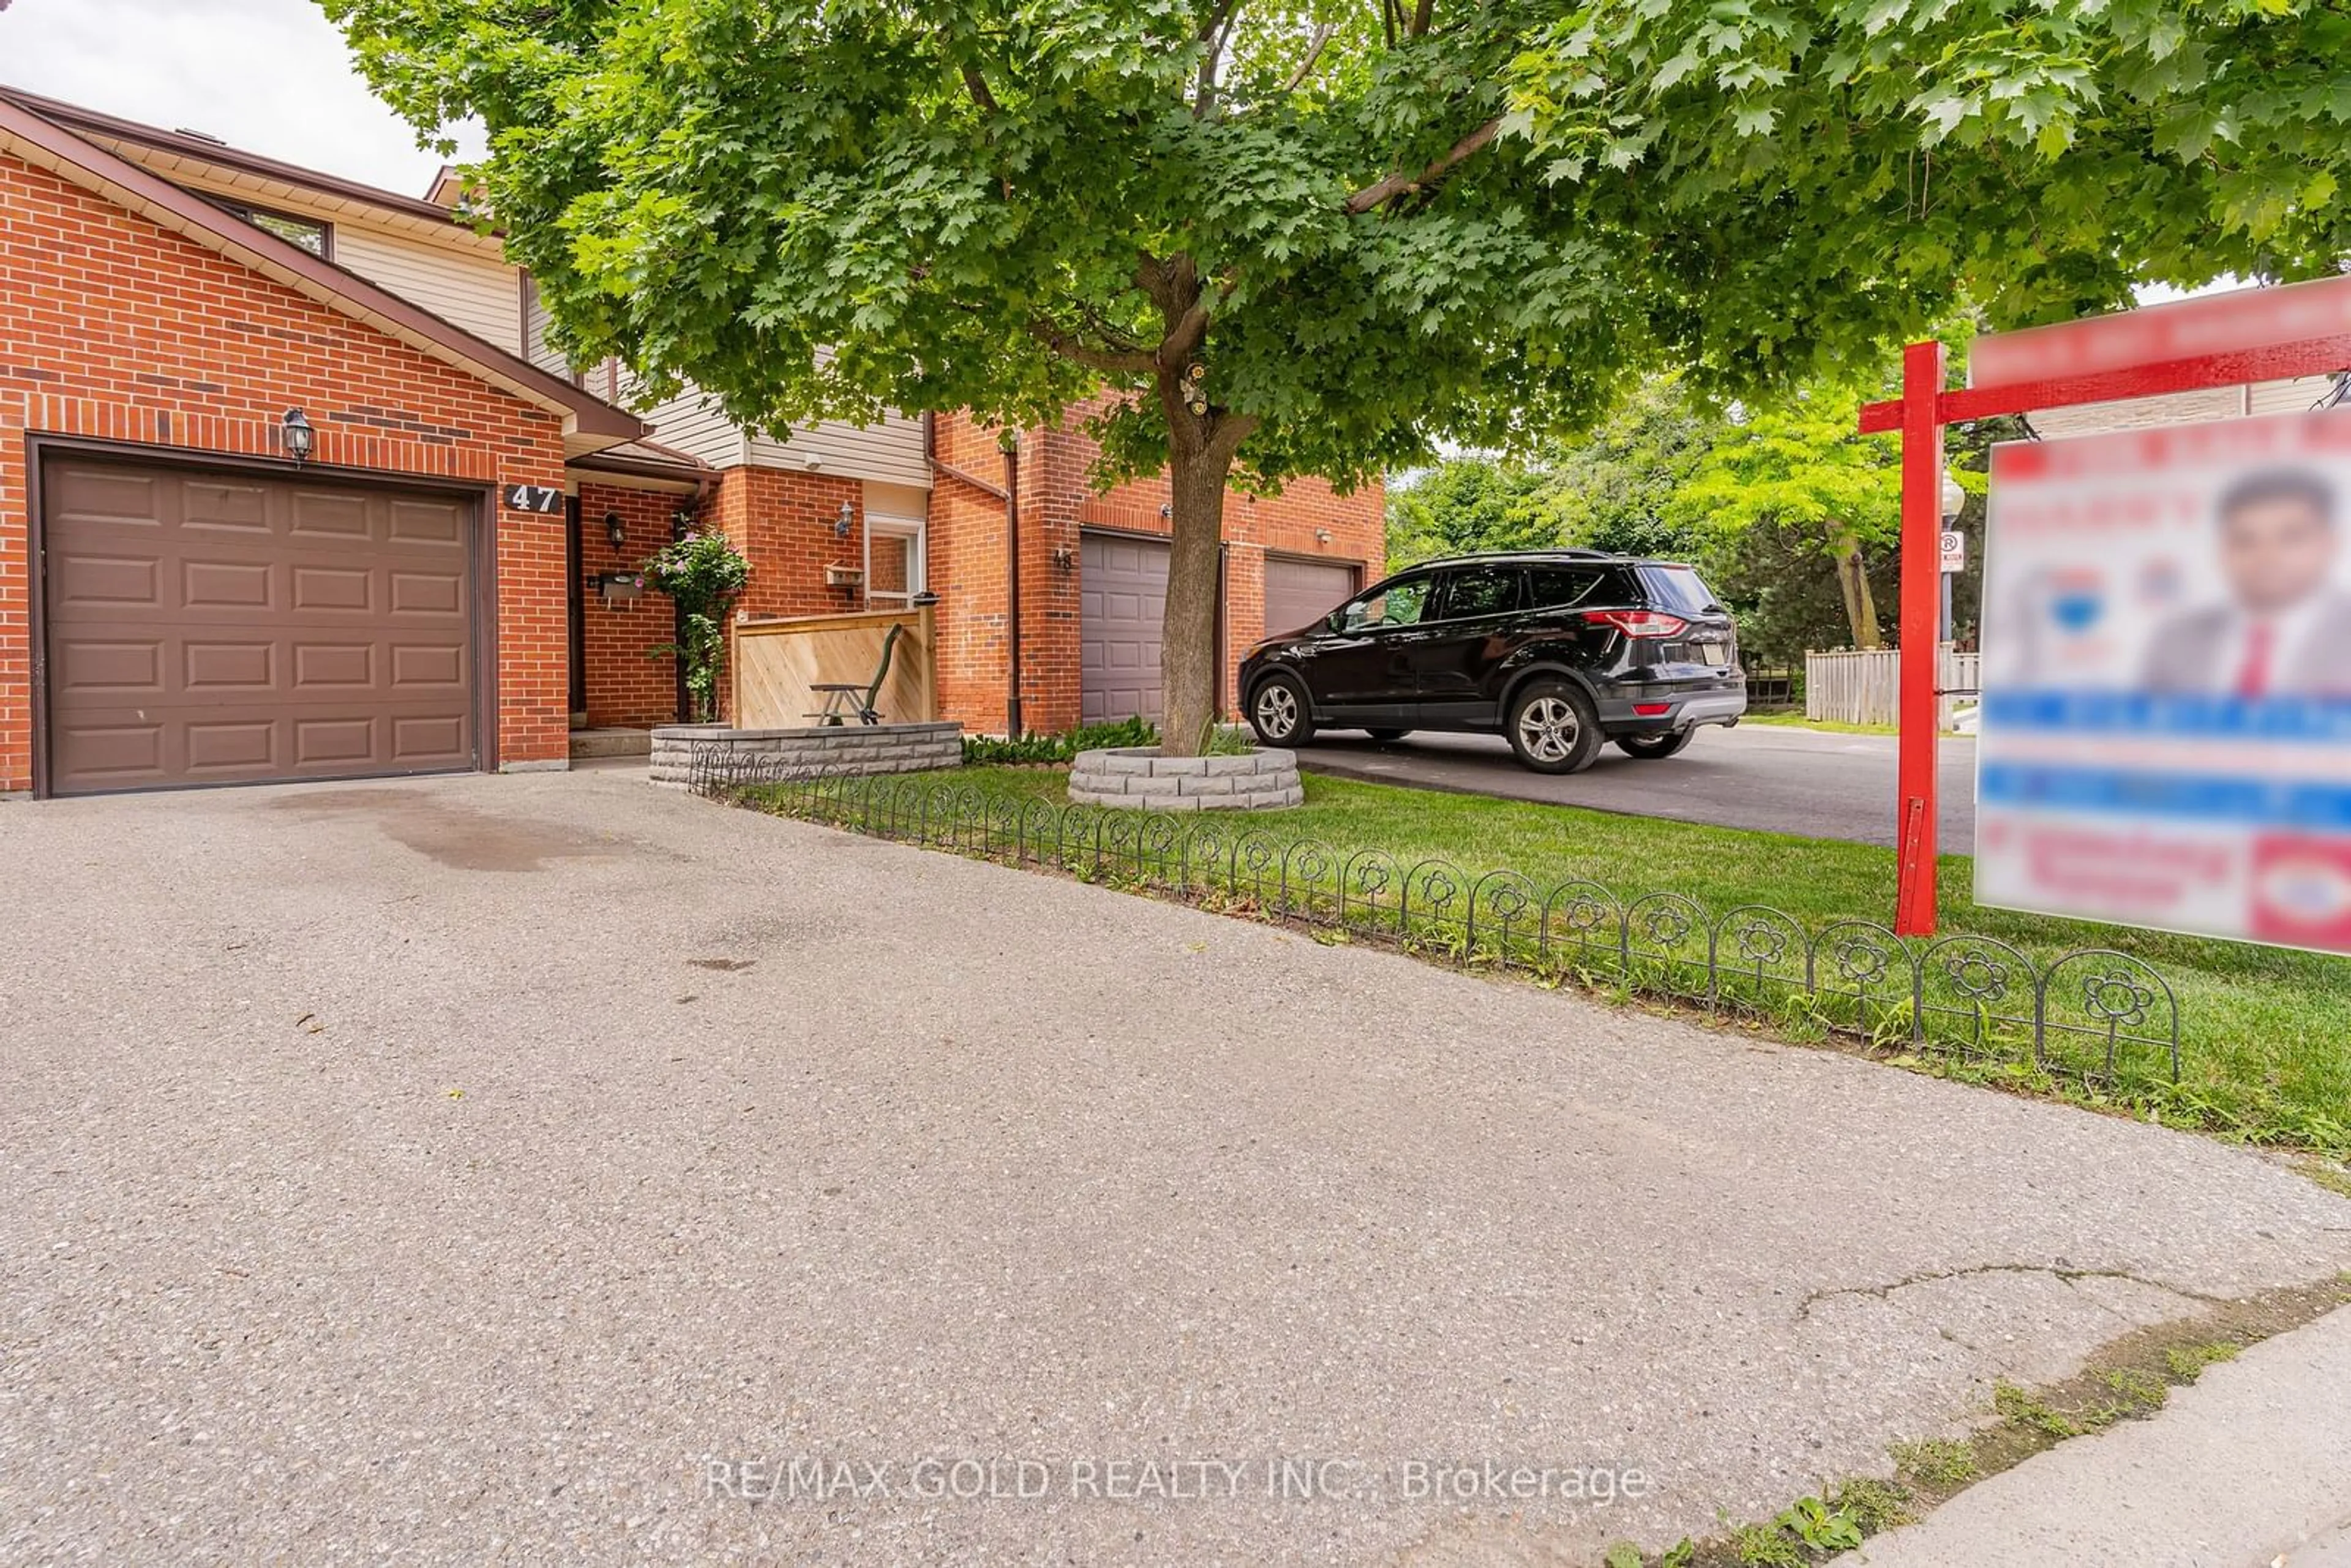 A pic from exterior of the house or condo for 47 Collins Cres #46, Brampton Ontario L6V 3M9